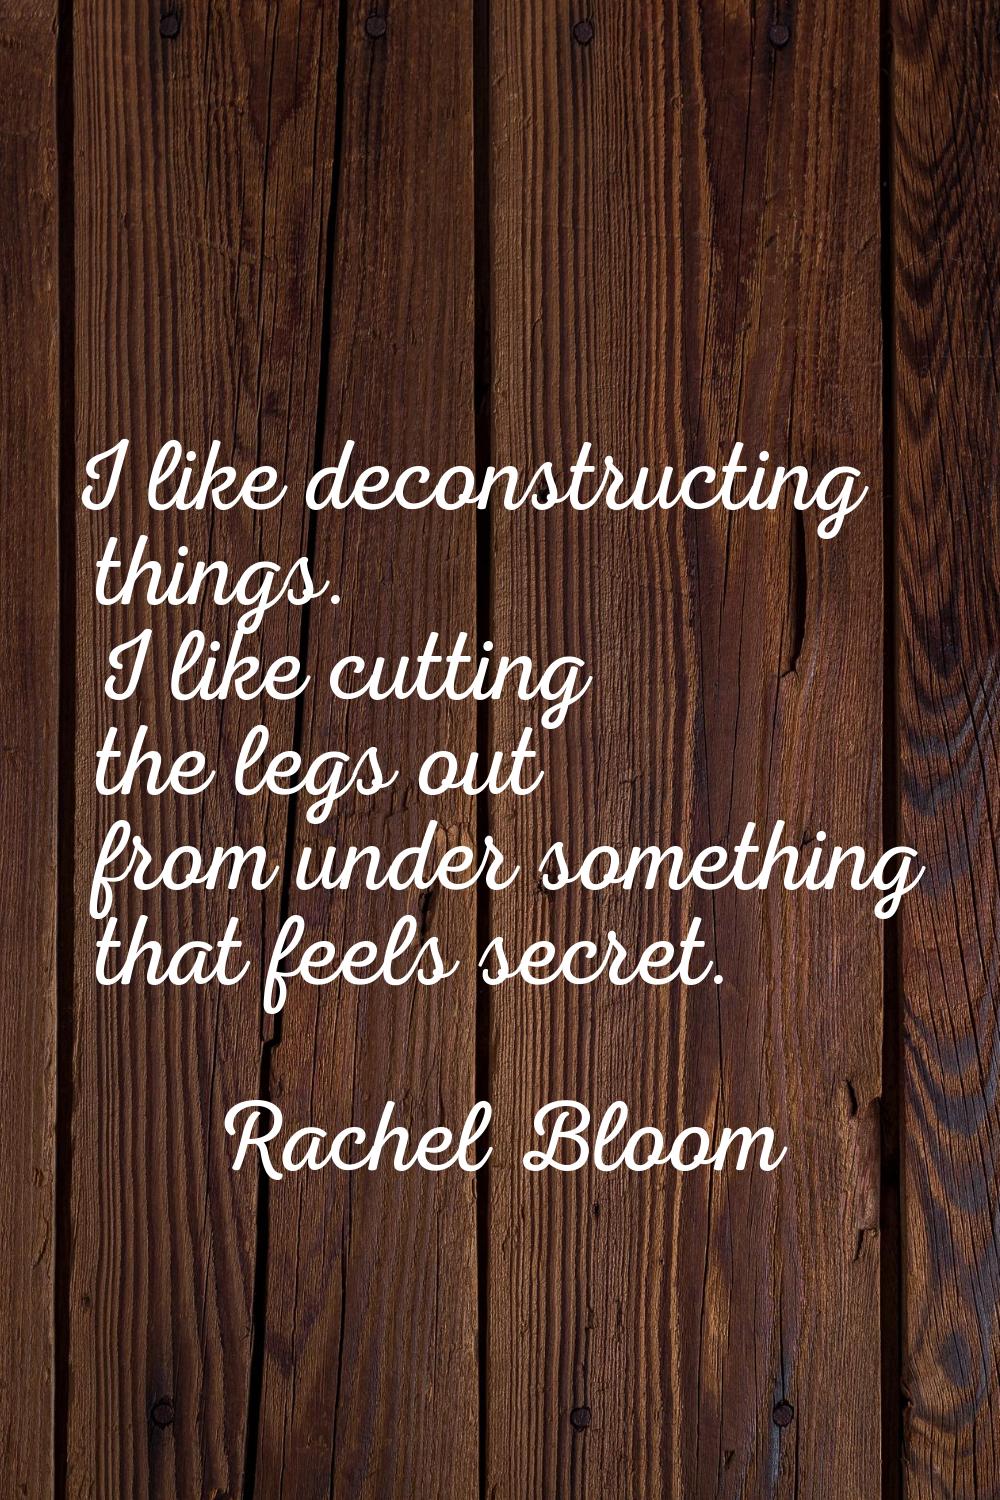 I like deconstructing things. I like cutting the legs out from under something that feels secret.